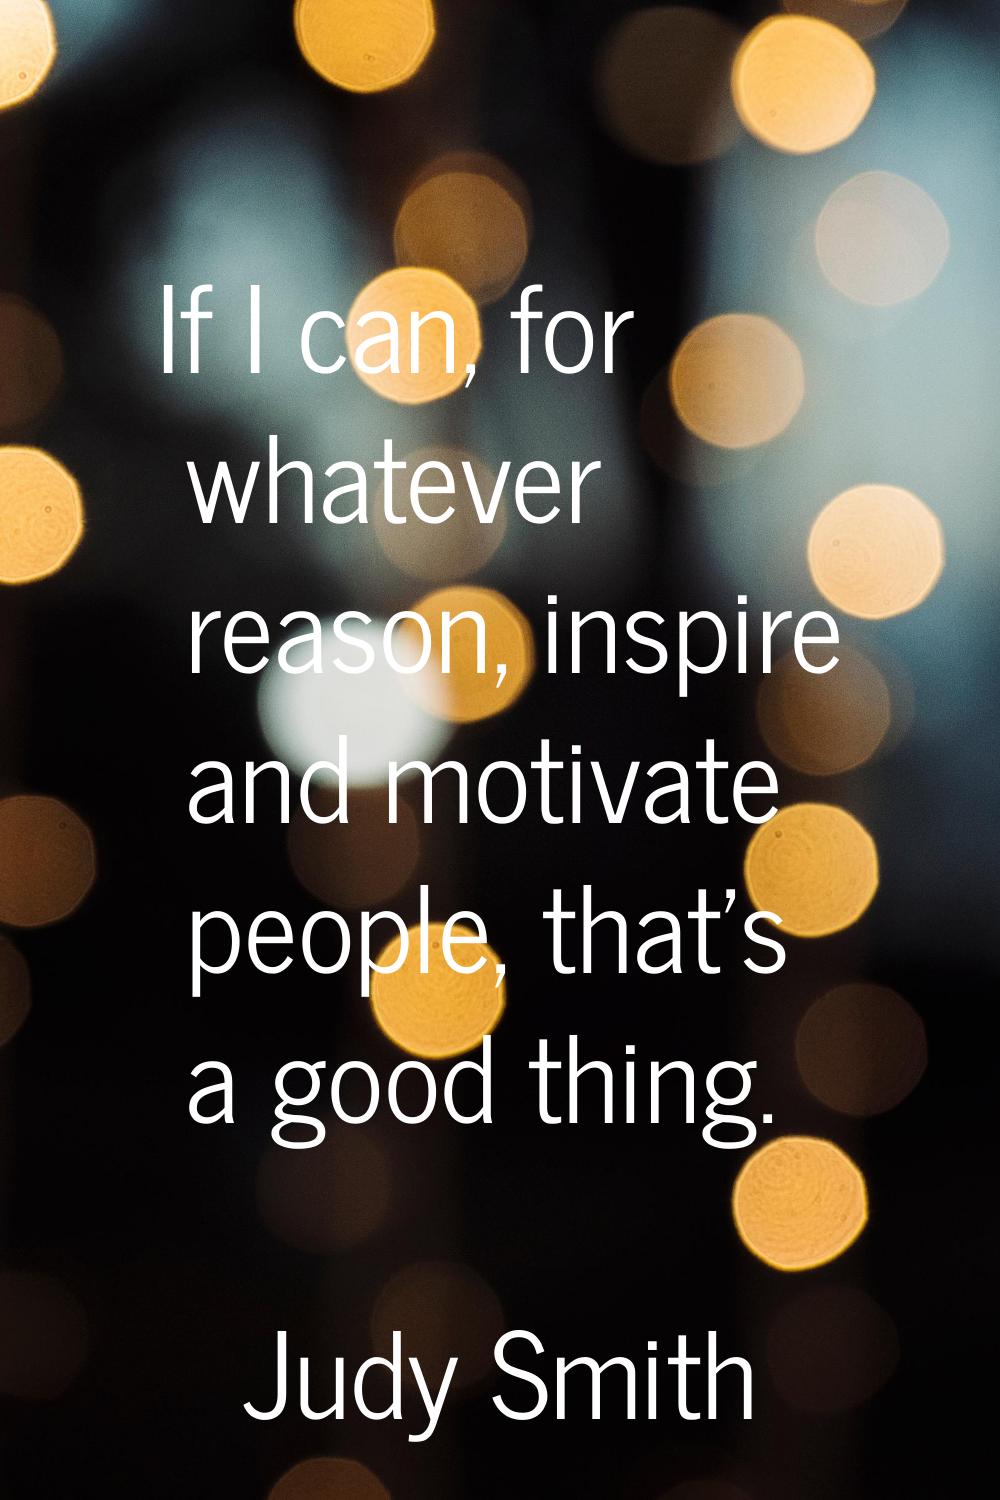 If I can, for whatever reason, inspire and motivate people, that's a good thing.